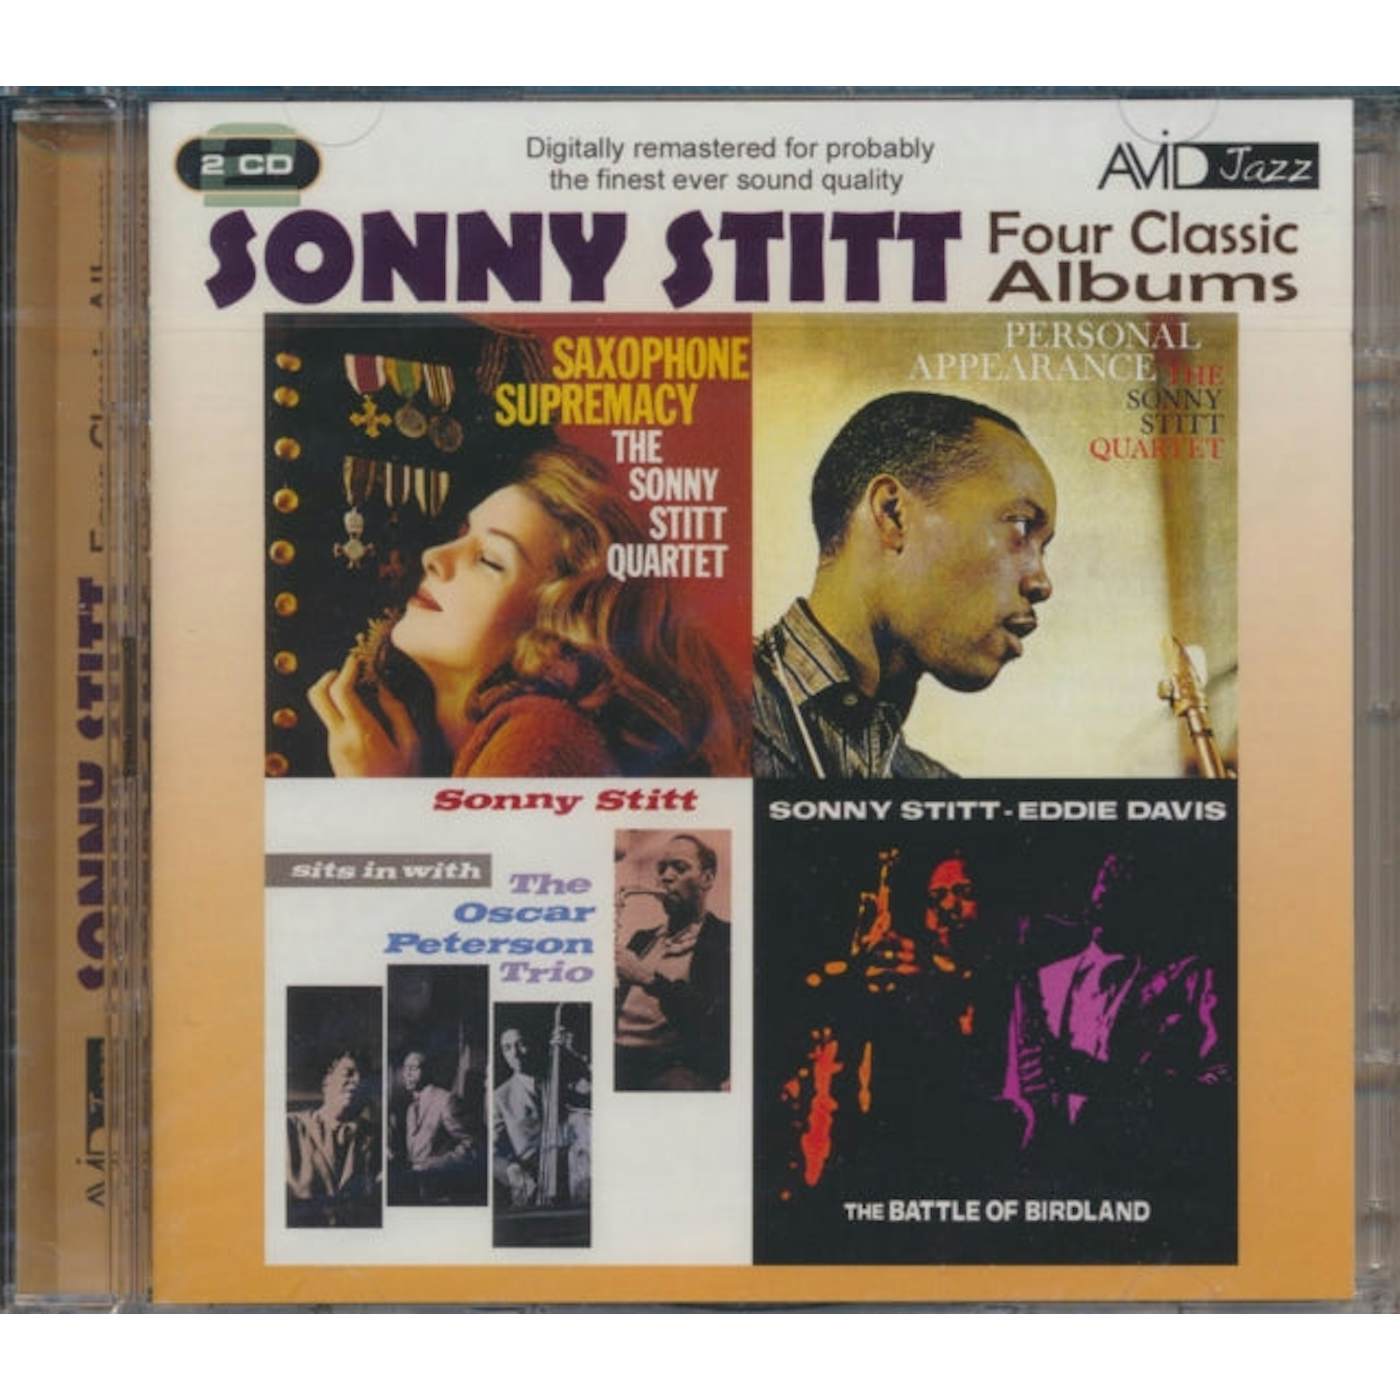 Sonny Stitt CD - Four Classic Albums (Saxophone Supremacy / Personal Appearance / Sits In With The Oscar Peterson Trio / The Battle Of Birdland)